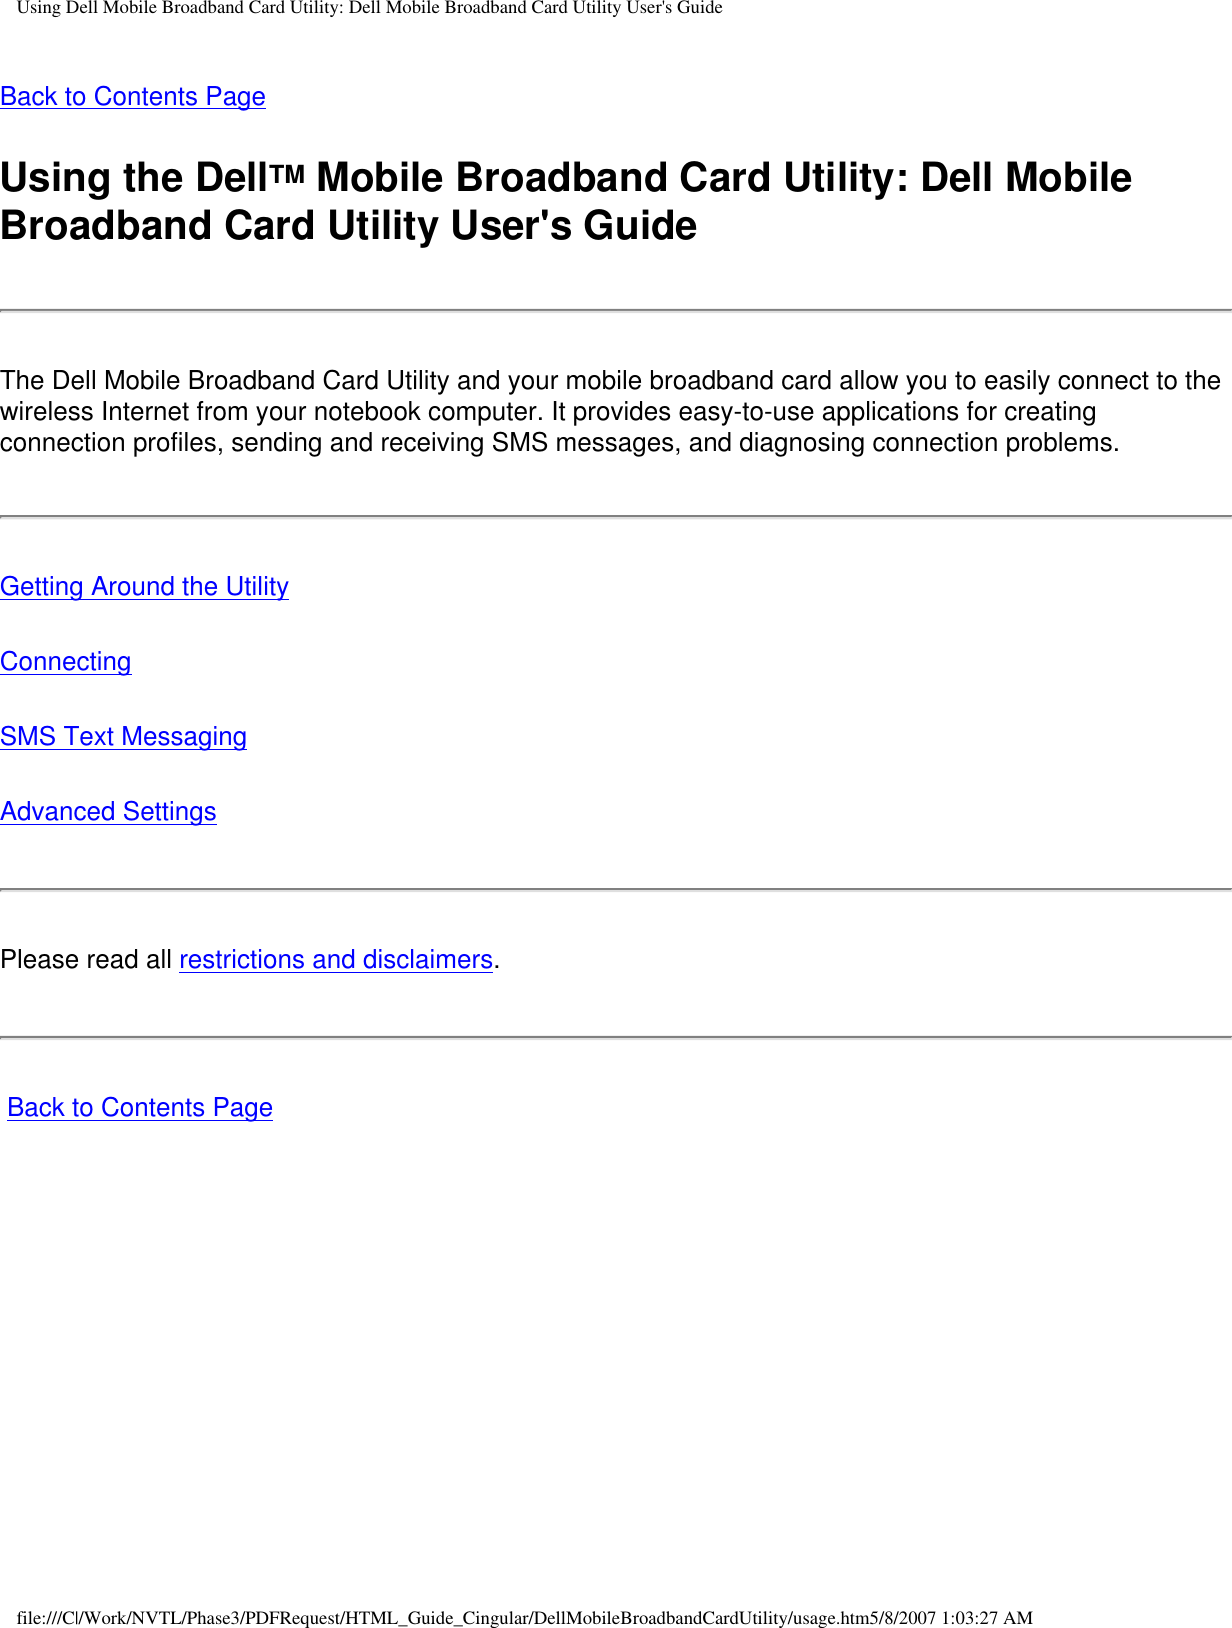 Using Dell Mobile Broadband Card Utility: Dell Mobile Broadband Card Utility User&apos;s GuideBack to Contents PageUsing the DellTM Mobile Broadband Card Utility: Dell Mobile Broadband Card Utility User&apos;s GuideThe Dell Mobile Broadband Card Utility and your mobile broadband card allow you to easily connect to the wireless Internet from your notebook computer. It provides easy-to-use applications for creating connection profiles, sending and receiving SMS messages, and diagnosing connection problems.Getting Around the UtilityConnectingSMS Text MessagingAdvanced SettingsPlease read all restrictions and disclaimers. Back to Contents Pagefile:///C|/Work/NVTL/Phase3/PDFRequest/HTML_Guide_Cingular/DellMobileBroadbandCardUtility/usage.htm5/8/2007 1:03:27 AM